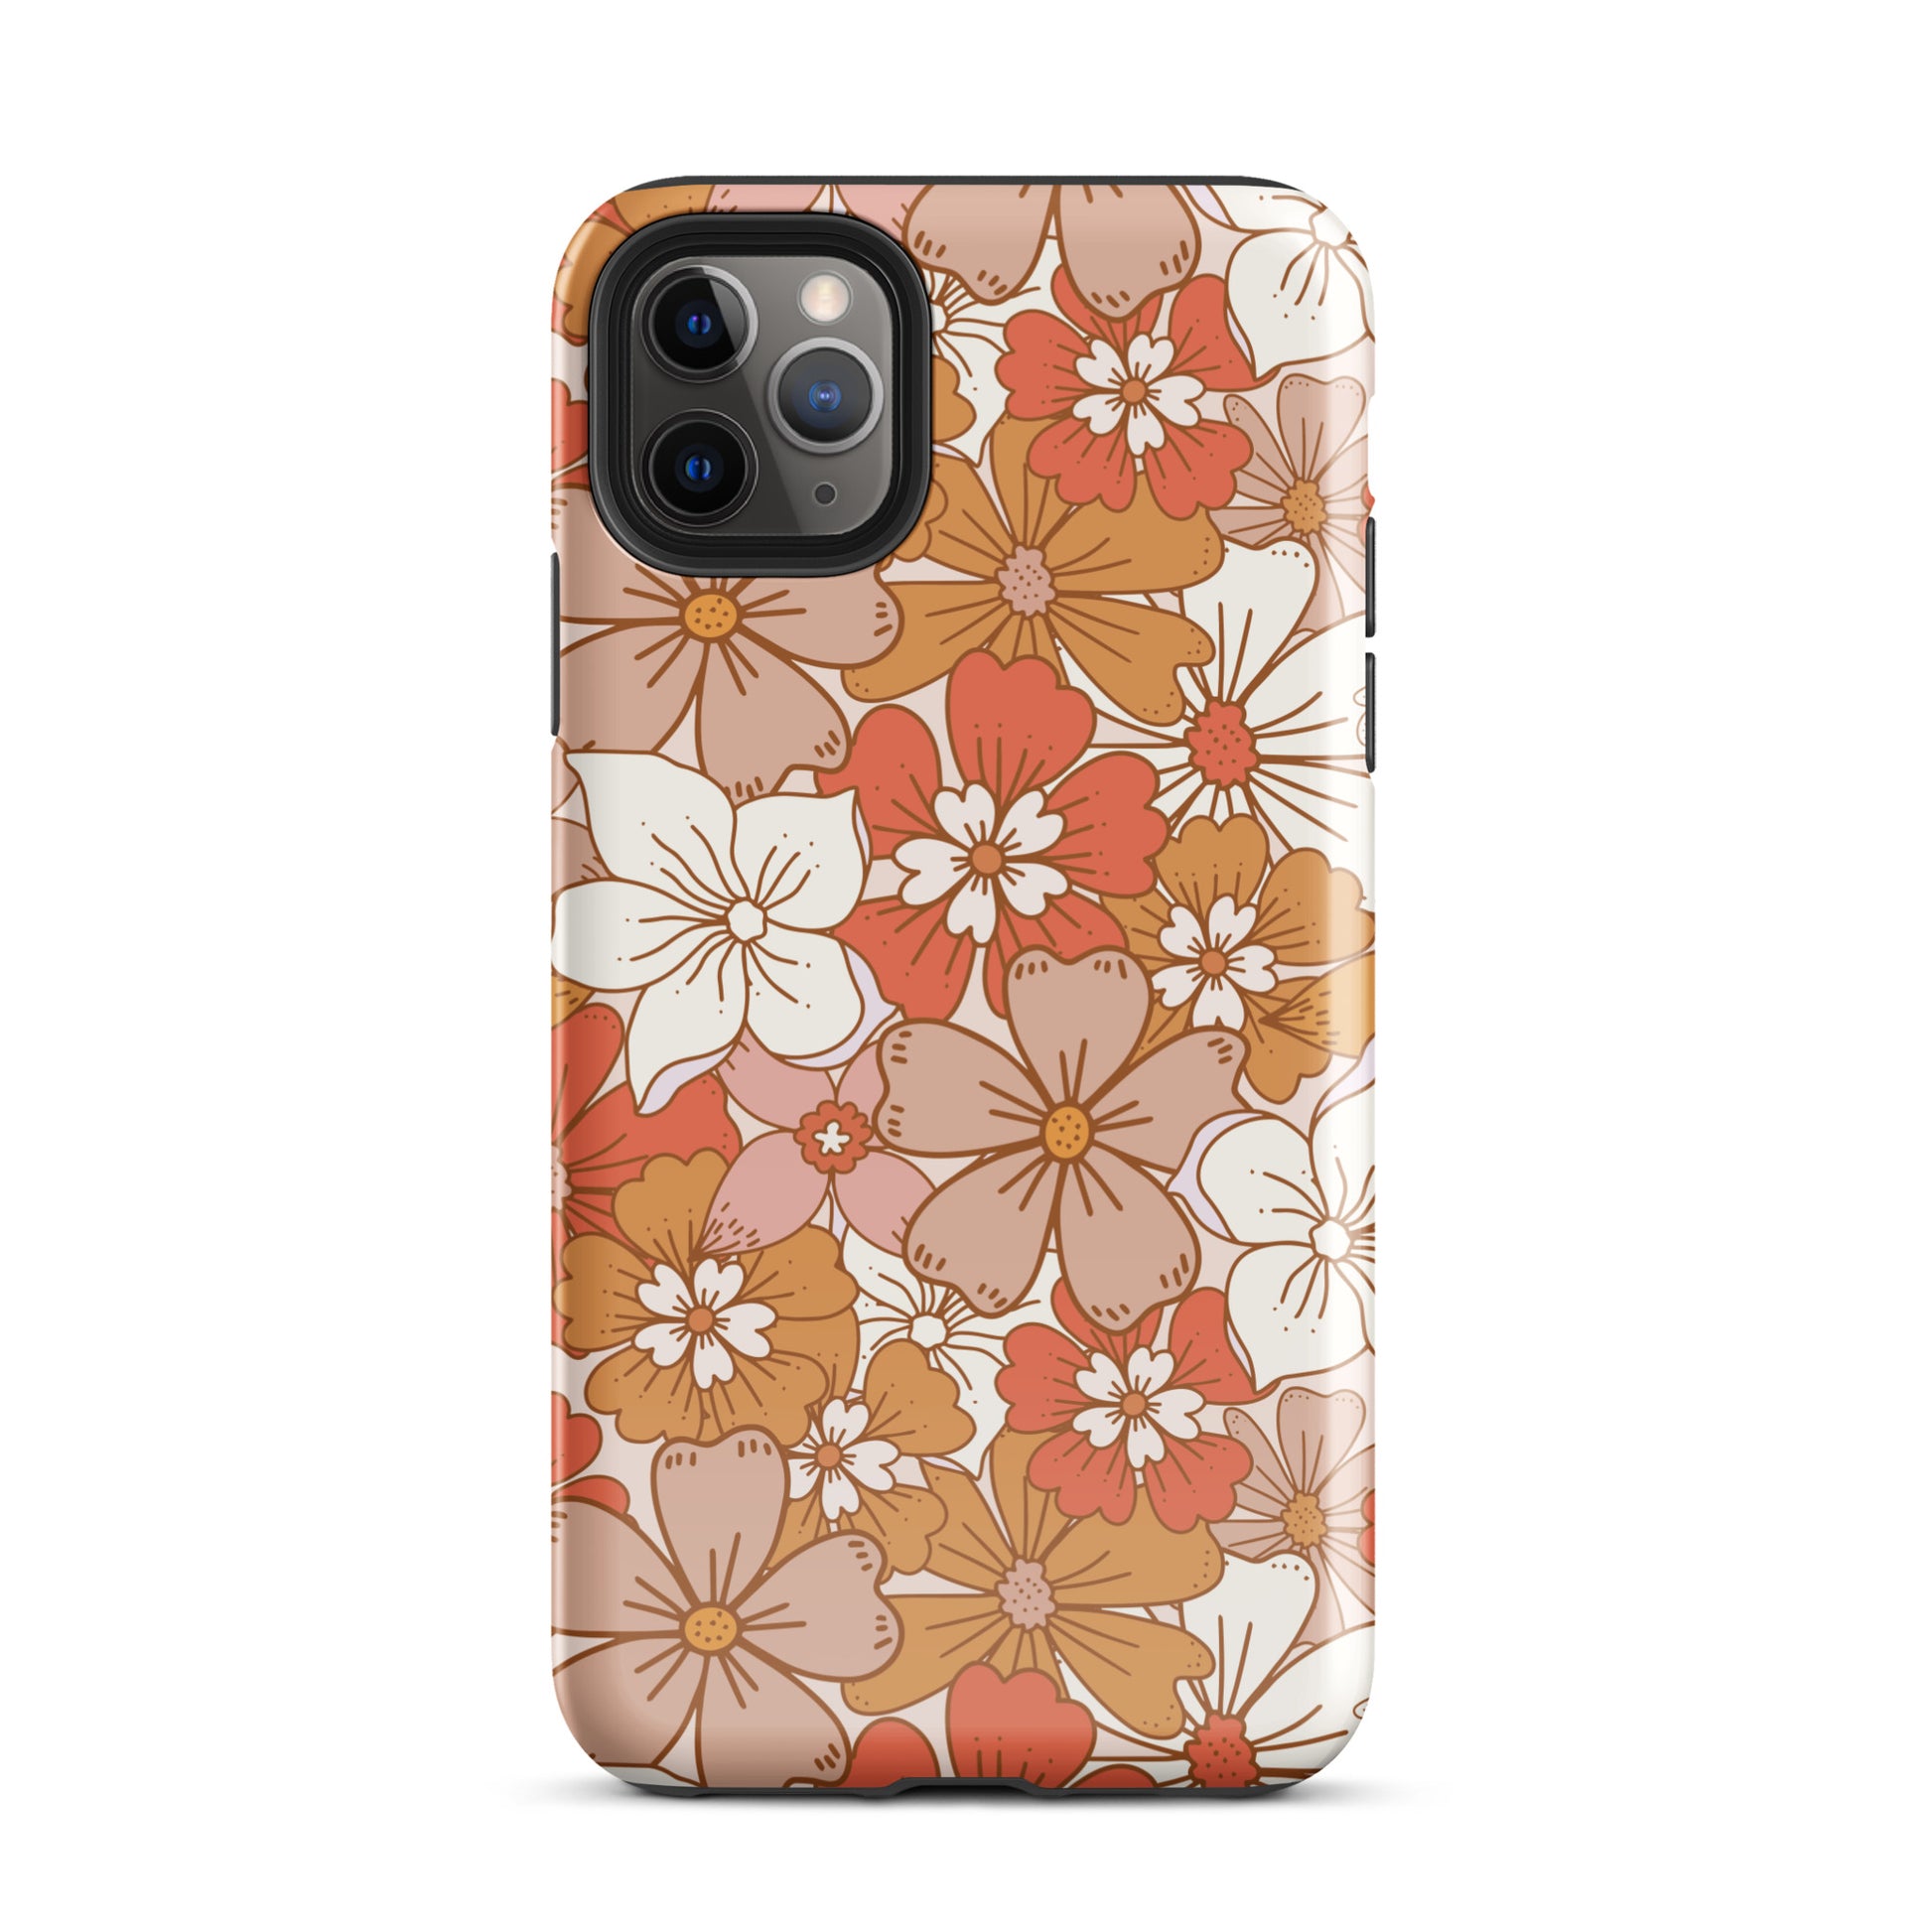 Vintage Garden iPhone Case iPhone 11 Pro Max Glossy